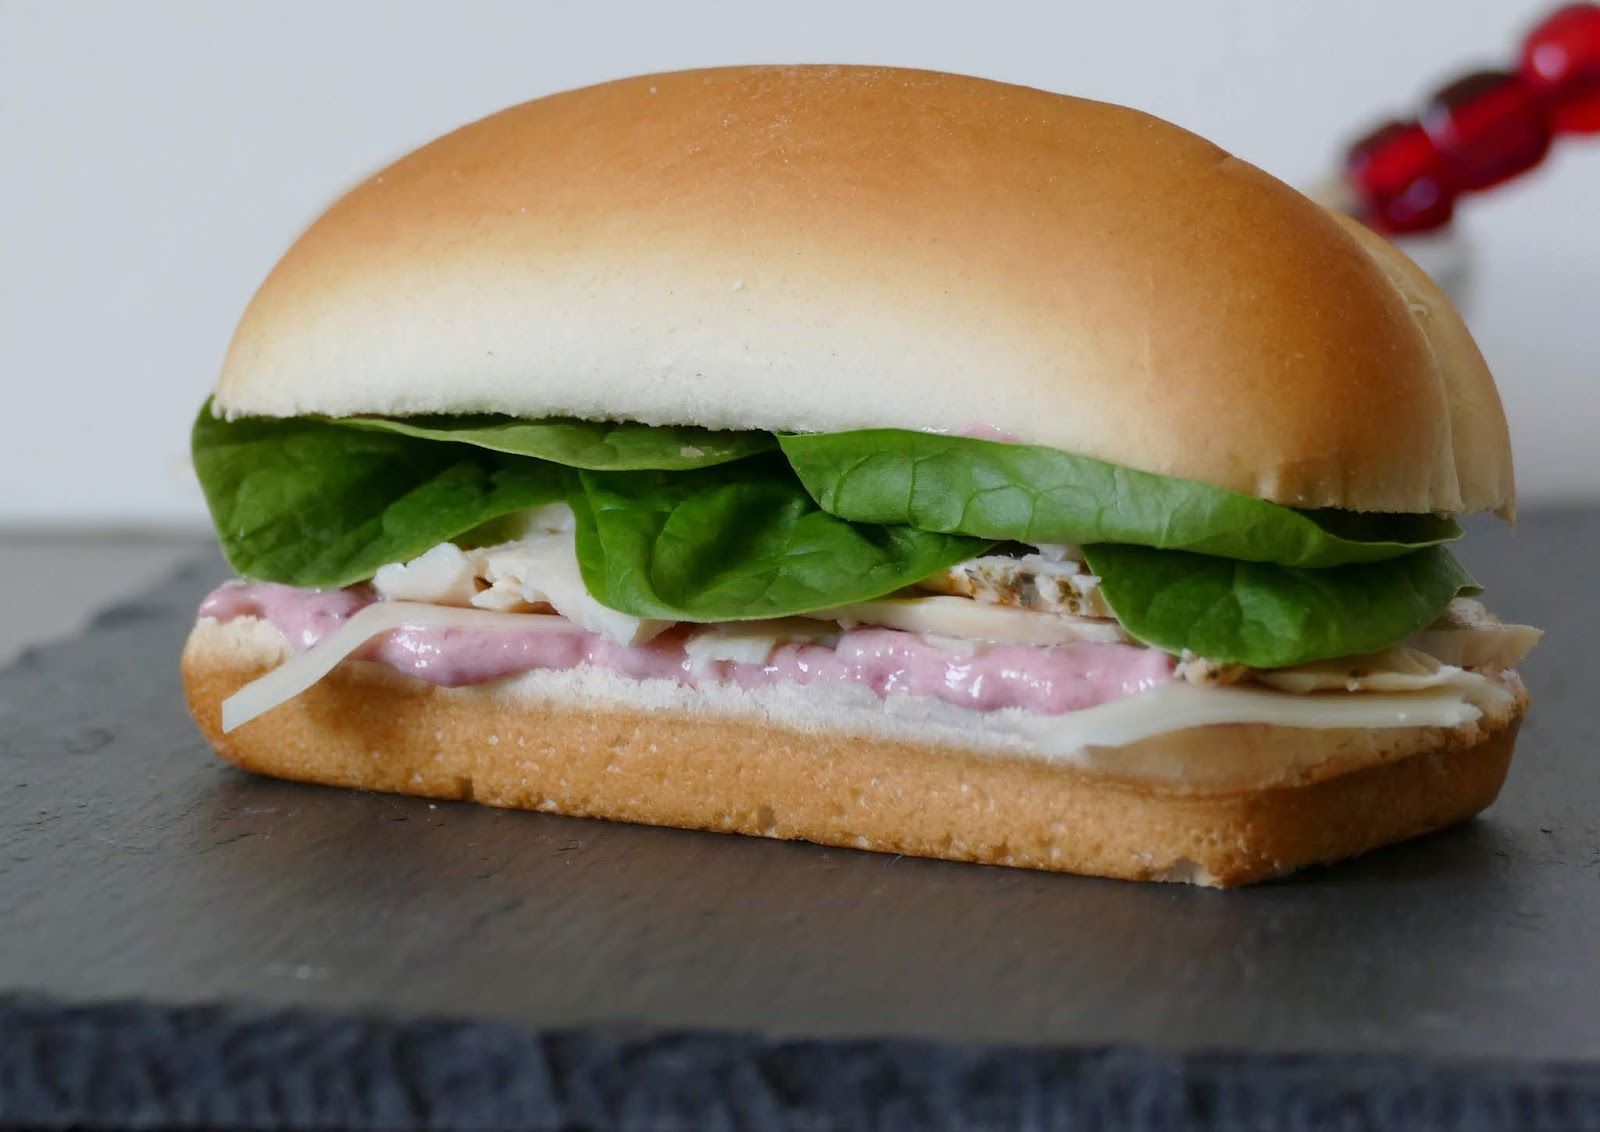 Use your leftover Thanksgiving or Christmas turkey, or deli turkey in this delicious sandwich! It's simple to make and tastes great with the cranberry mayo, spinach, turkey and swiss cheese! Make it for lunch or serve at your next game day party.